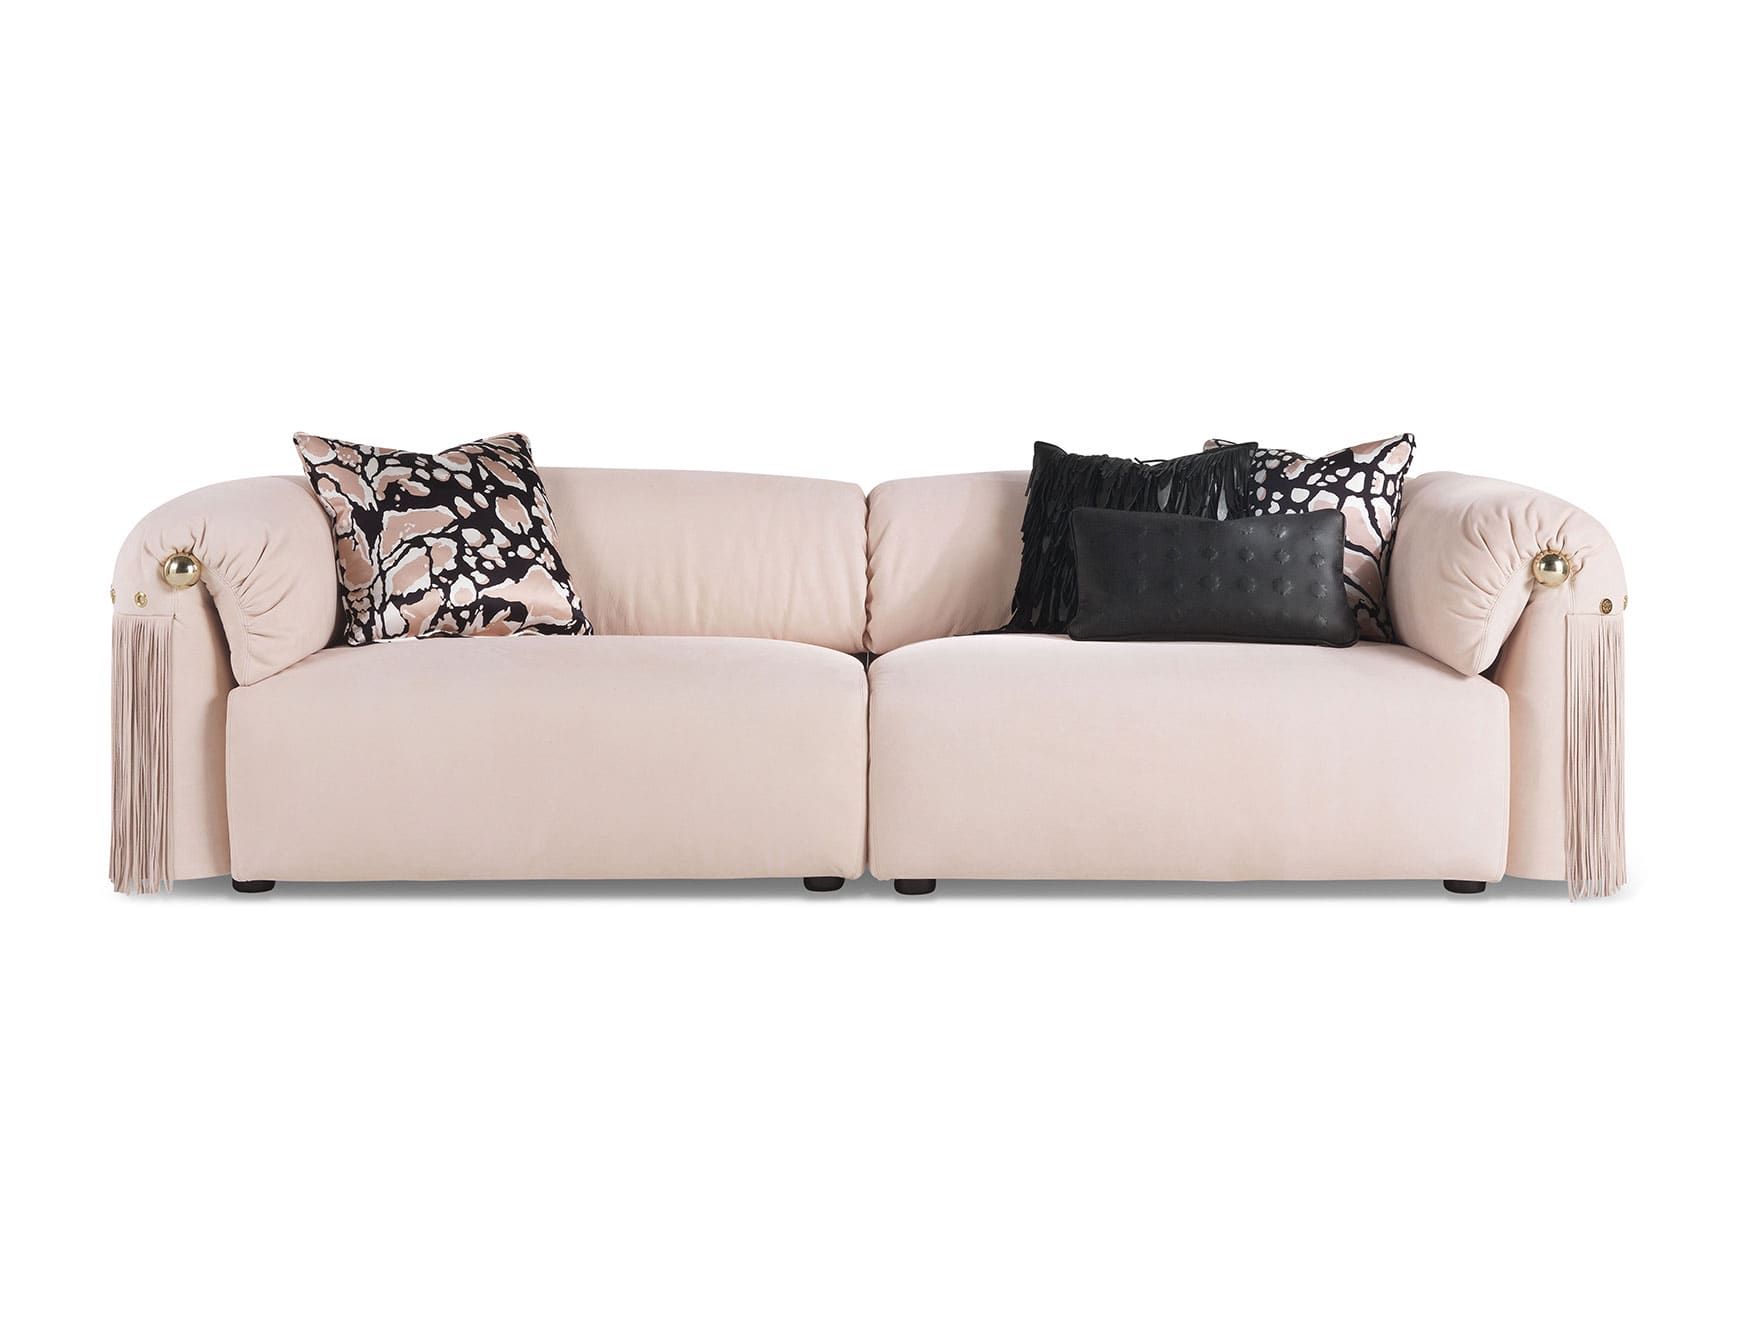 Malawi modern luxury sofa chair with pink leather